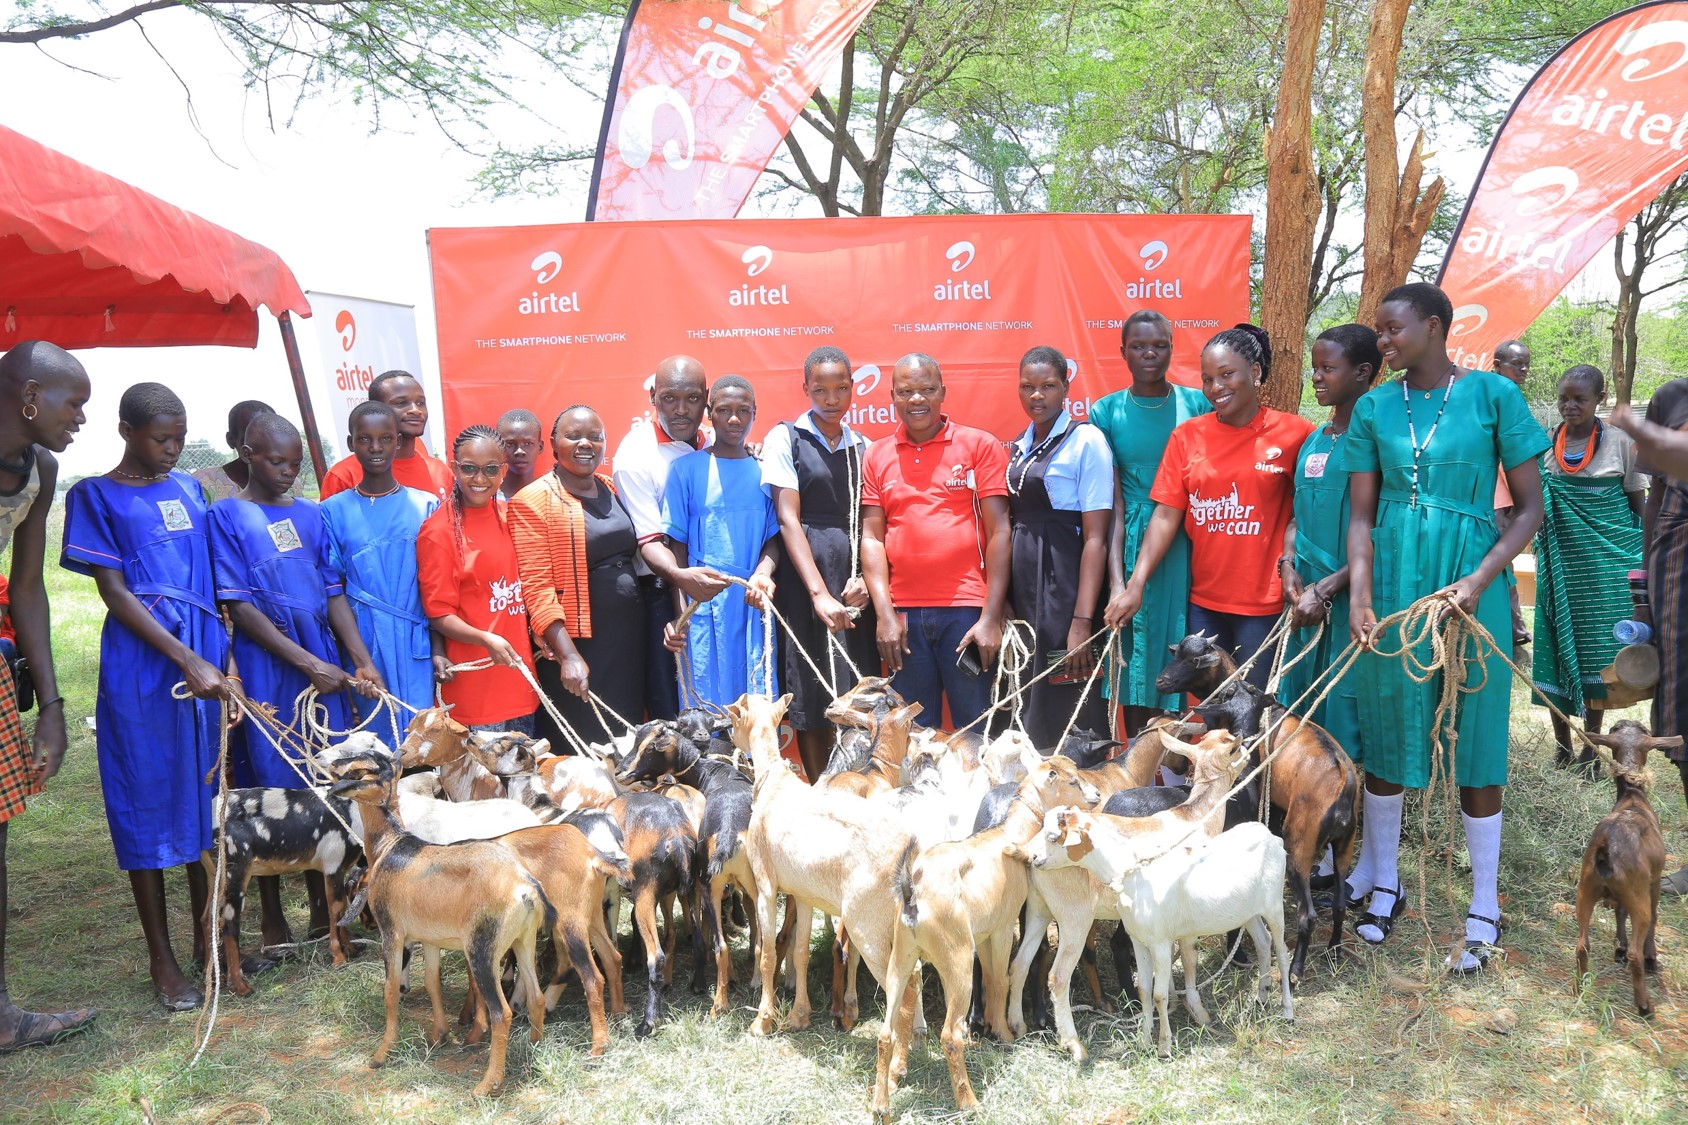 Moroto Girls to Fund Their Education Through ‘Goats For Girls’ Initiative